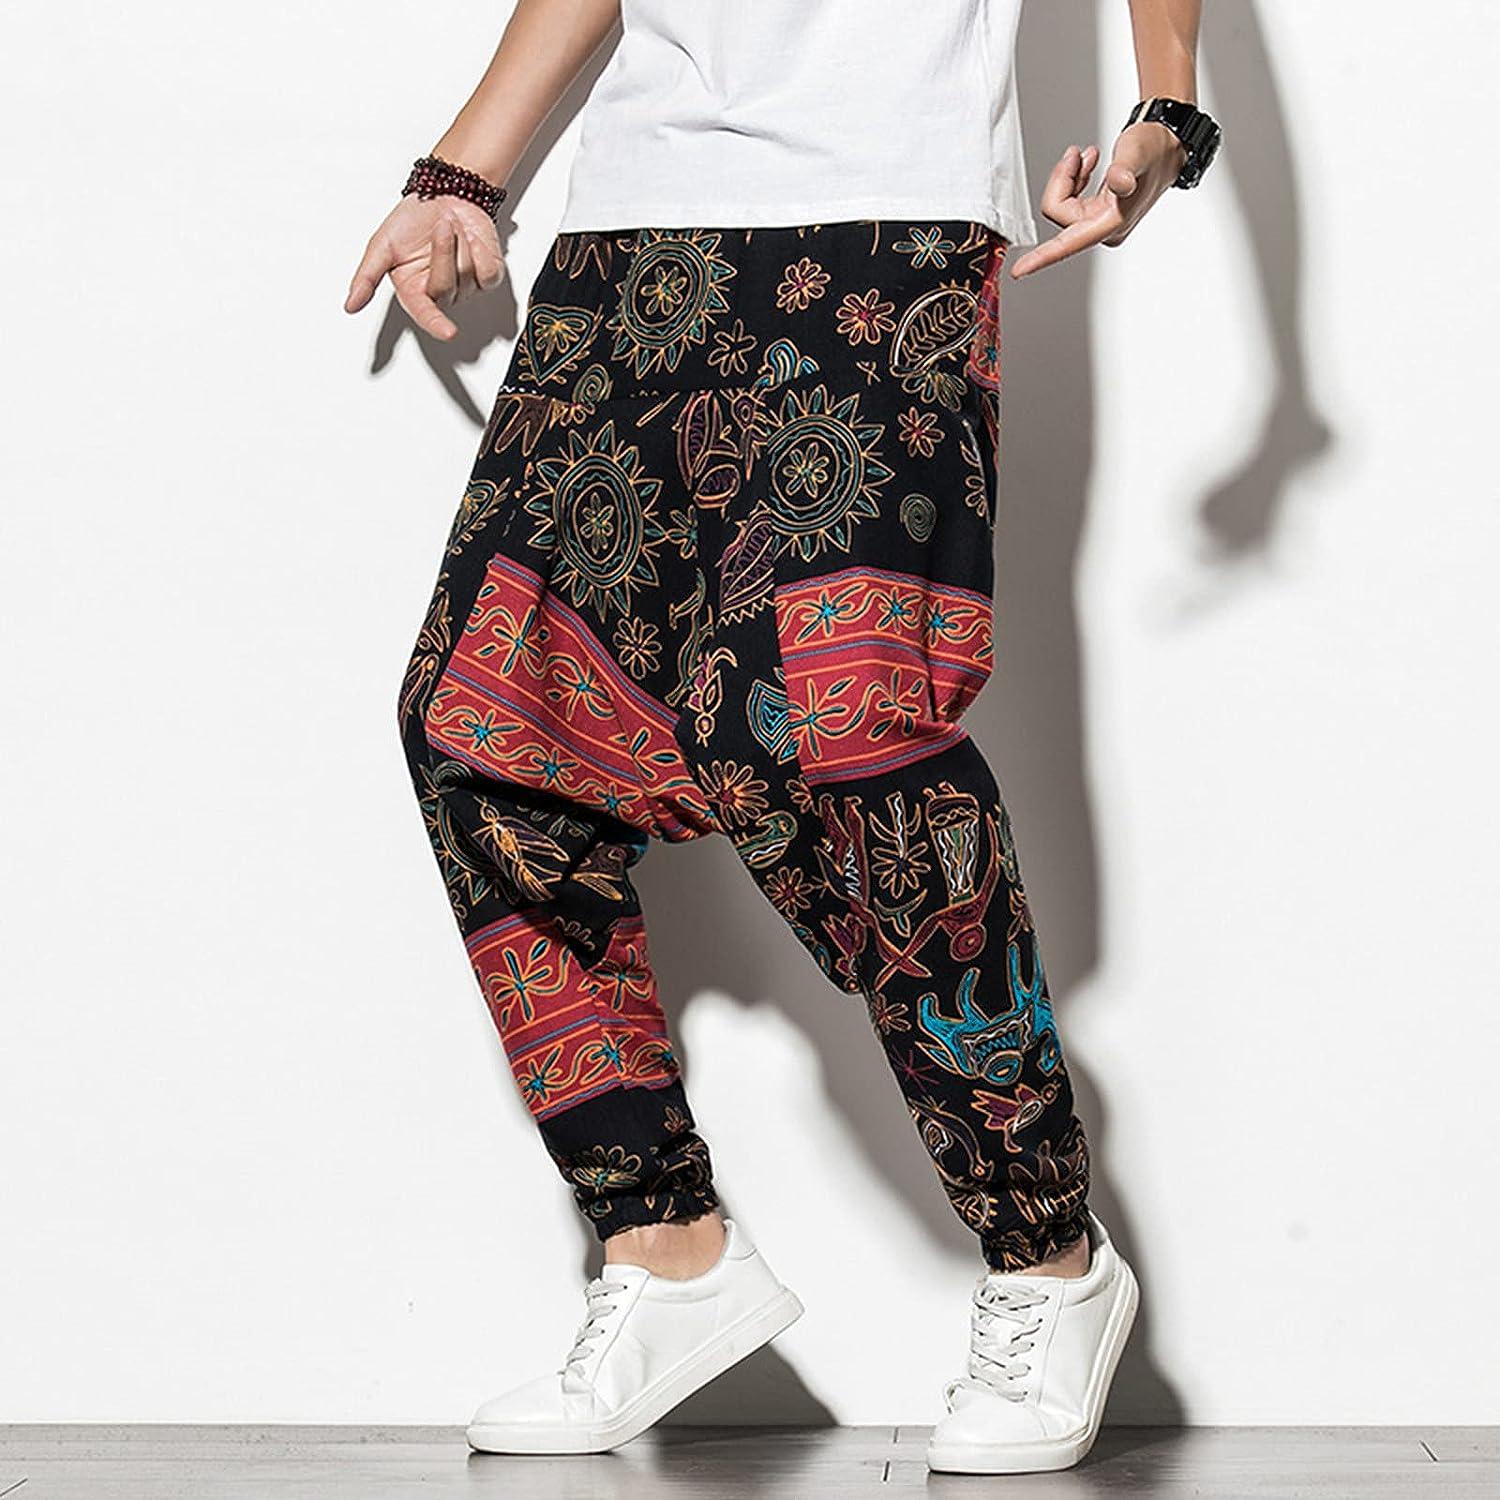 Mens Linen Drop Low Crotch Pants Tapered Loose Baggy Trousers Joggers  Casual Punk Hippie